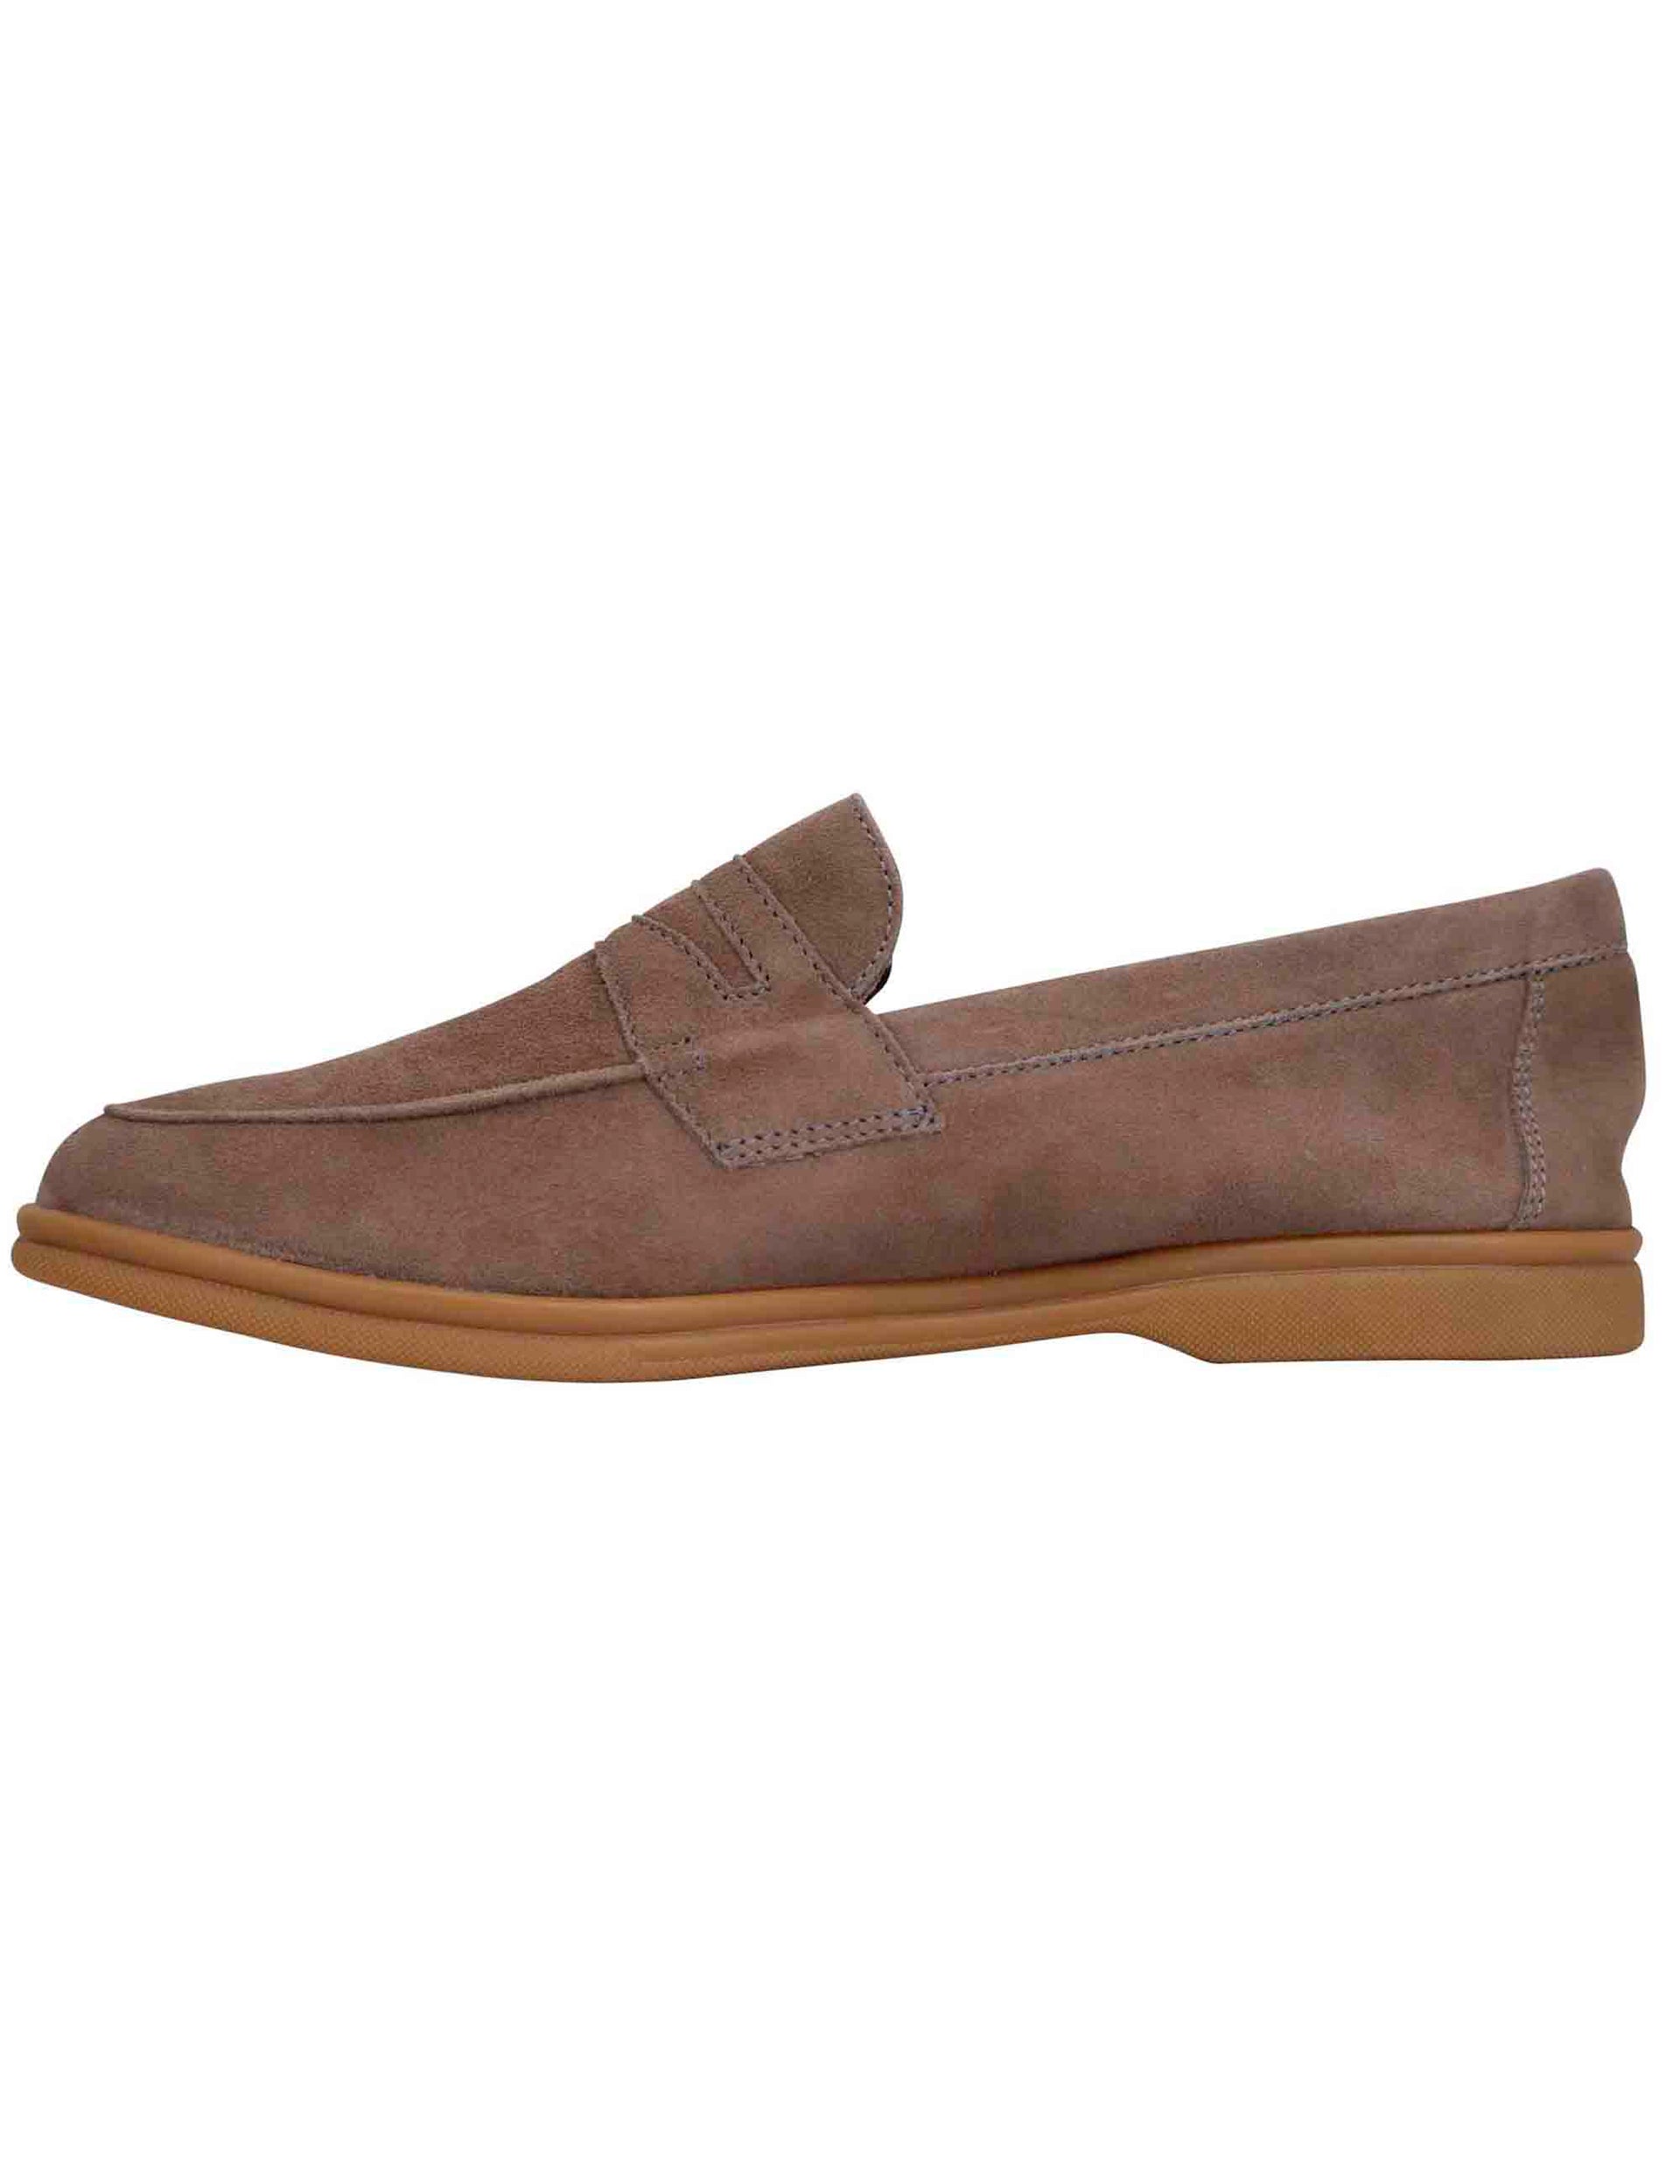 Men's moccasins in taupe suede with light rubber sole